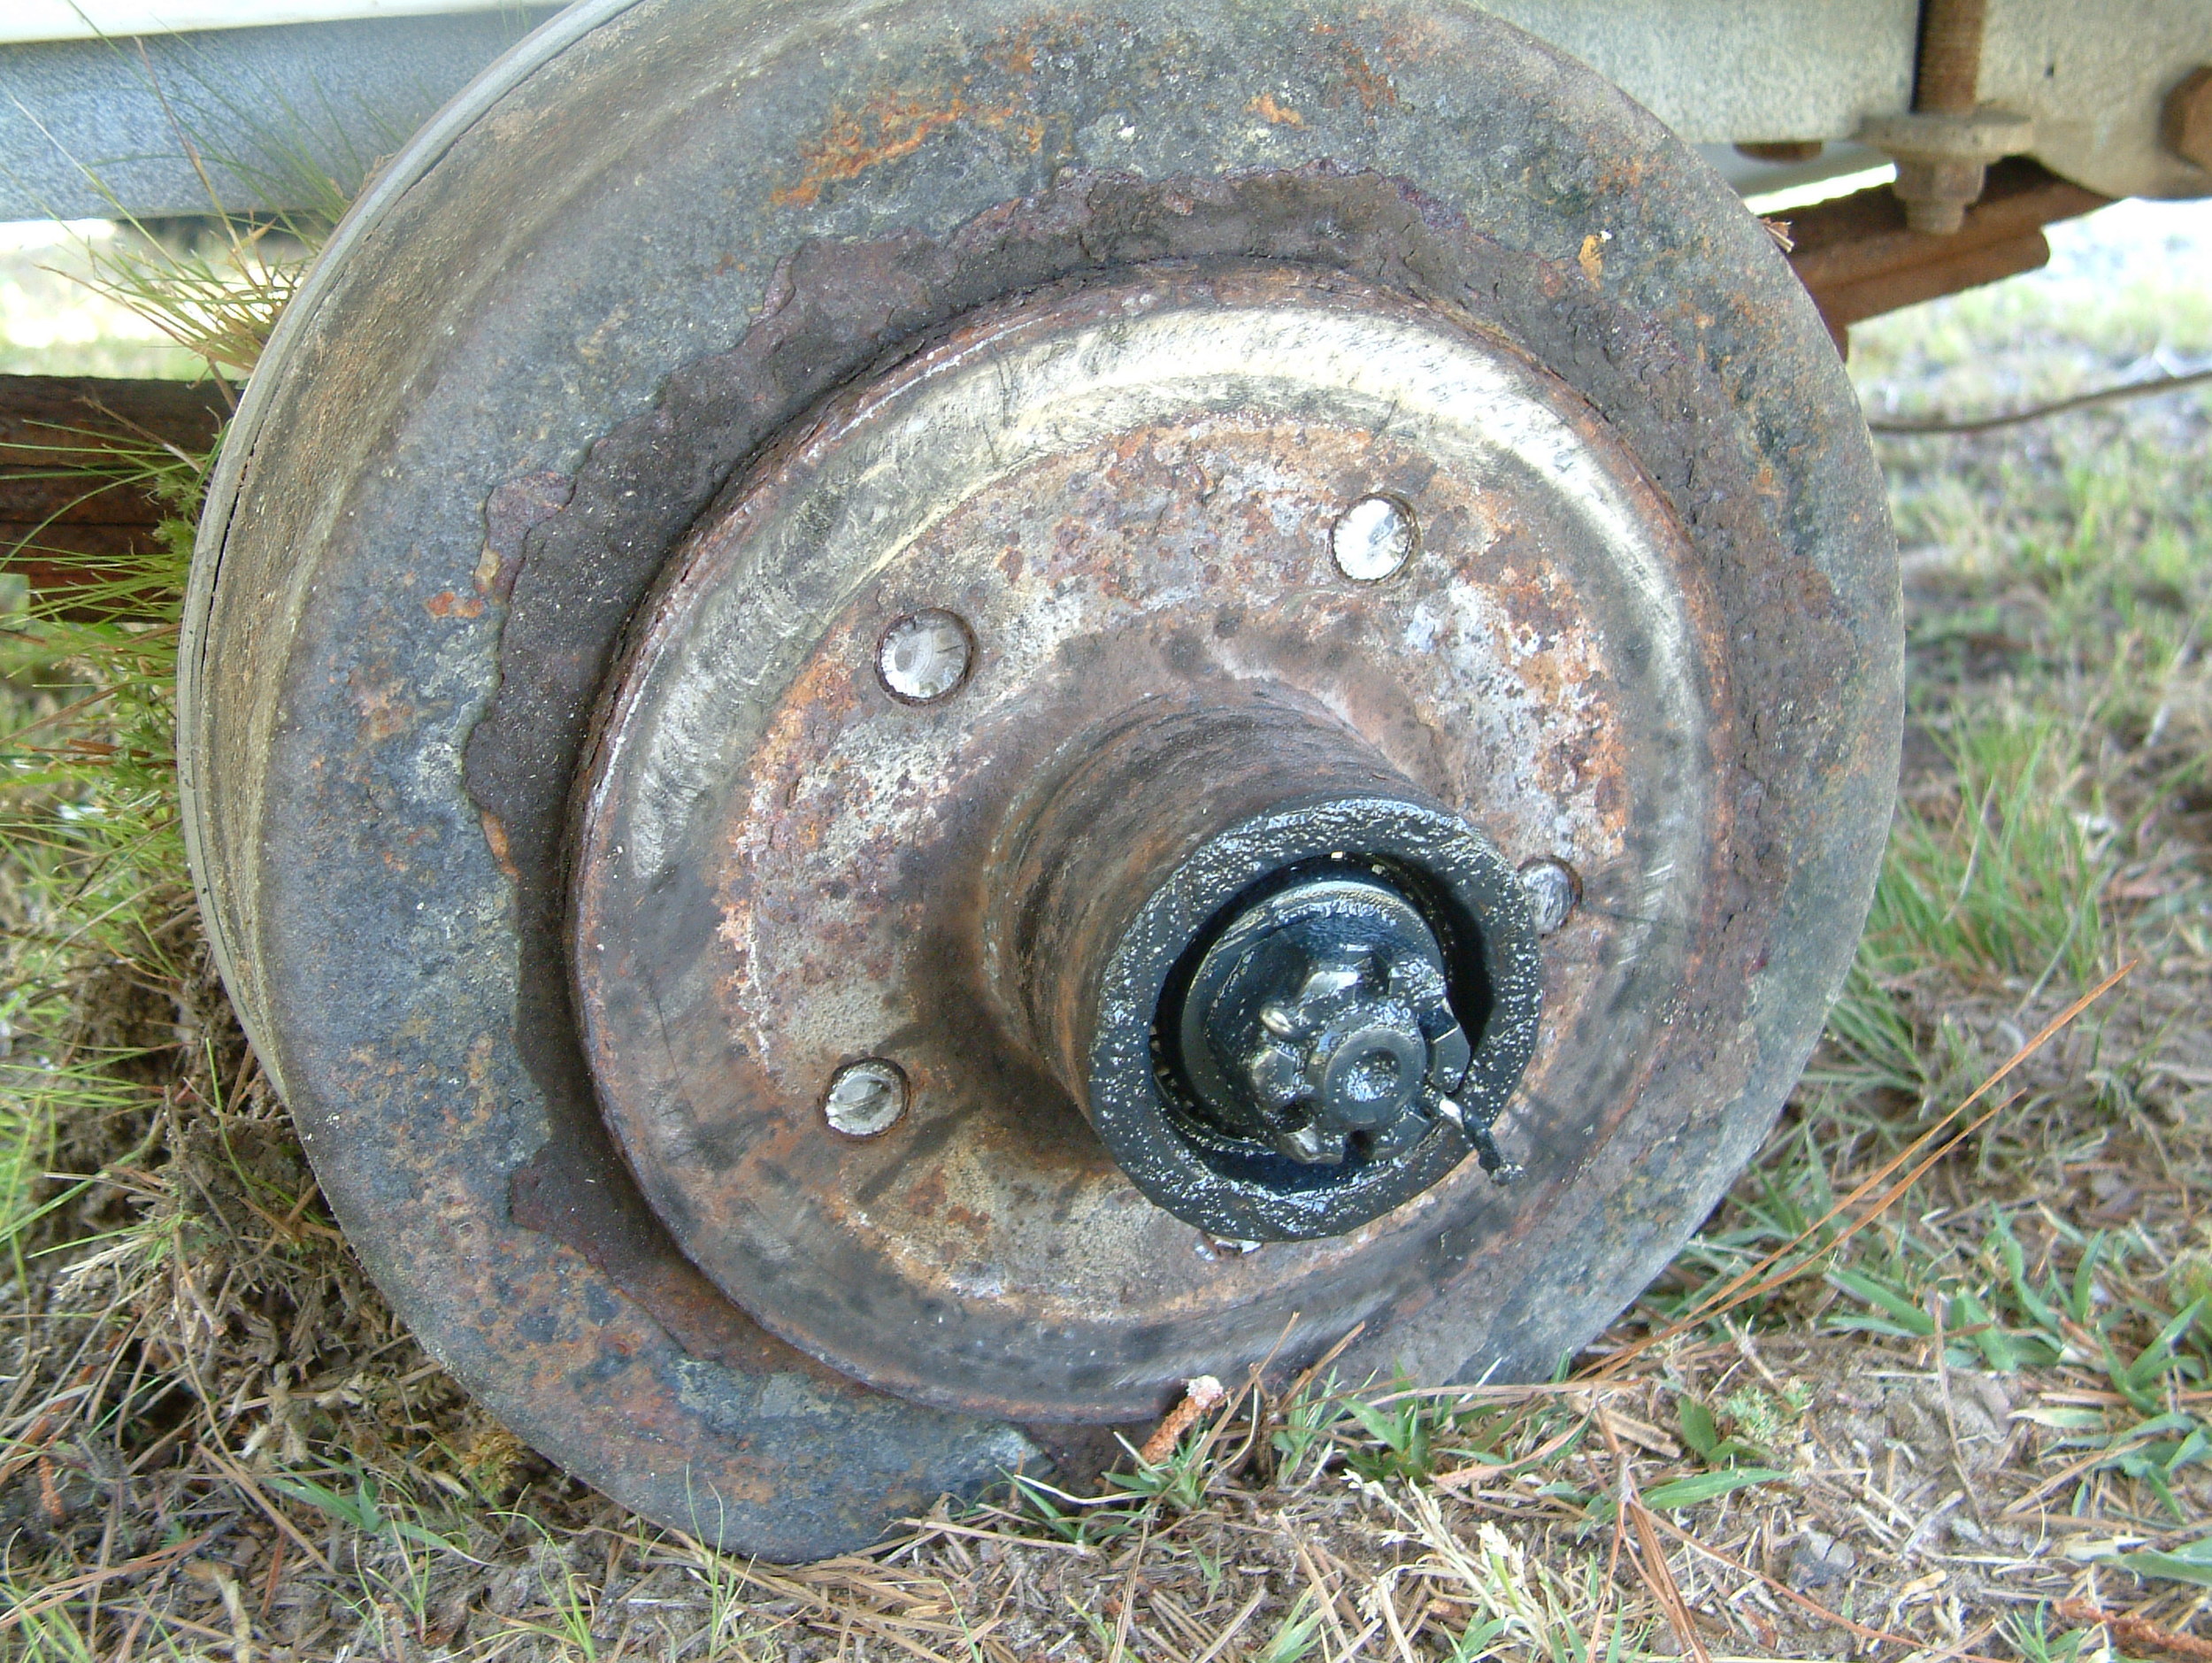 Boat trailer tire after the tire flew off